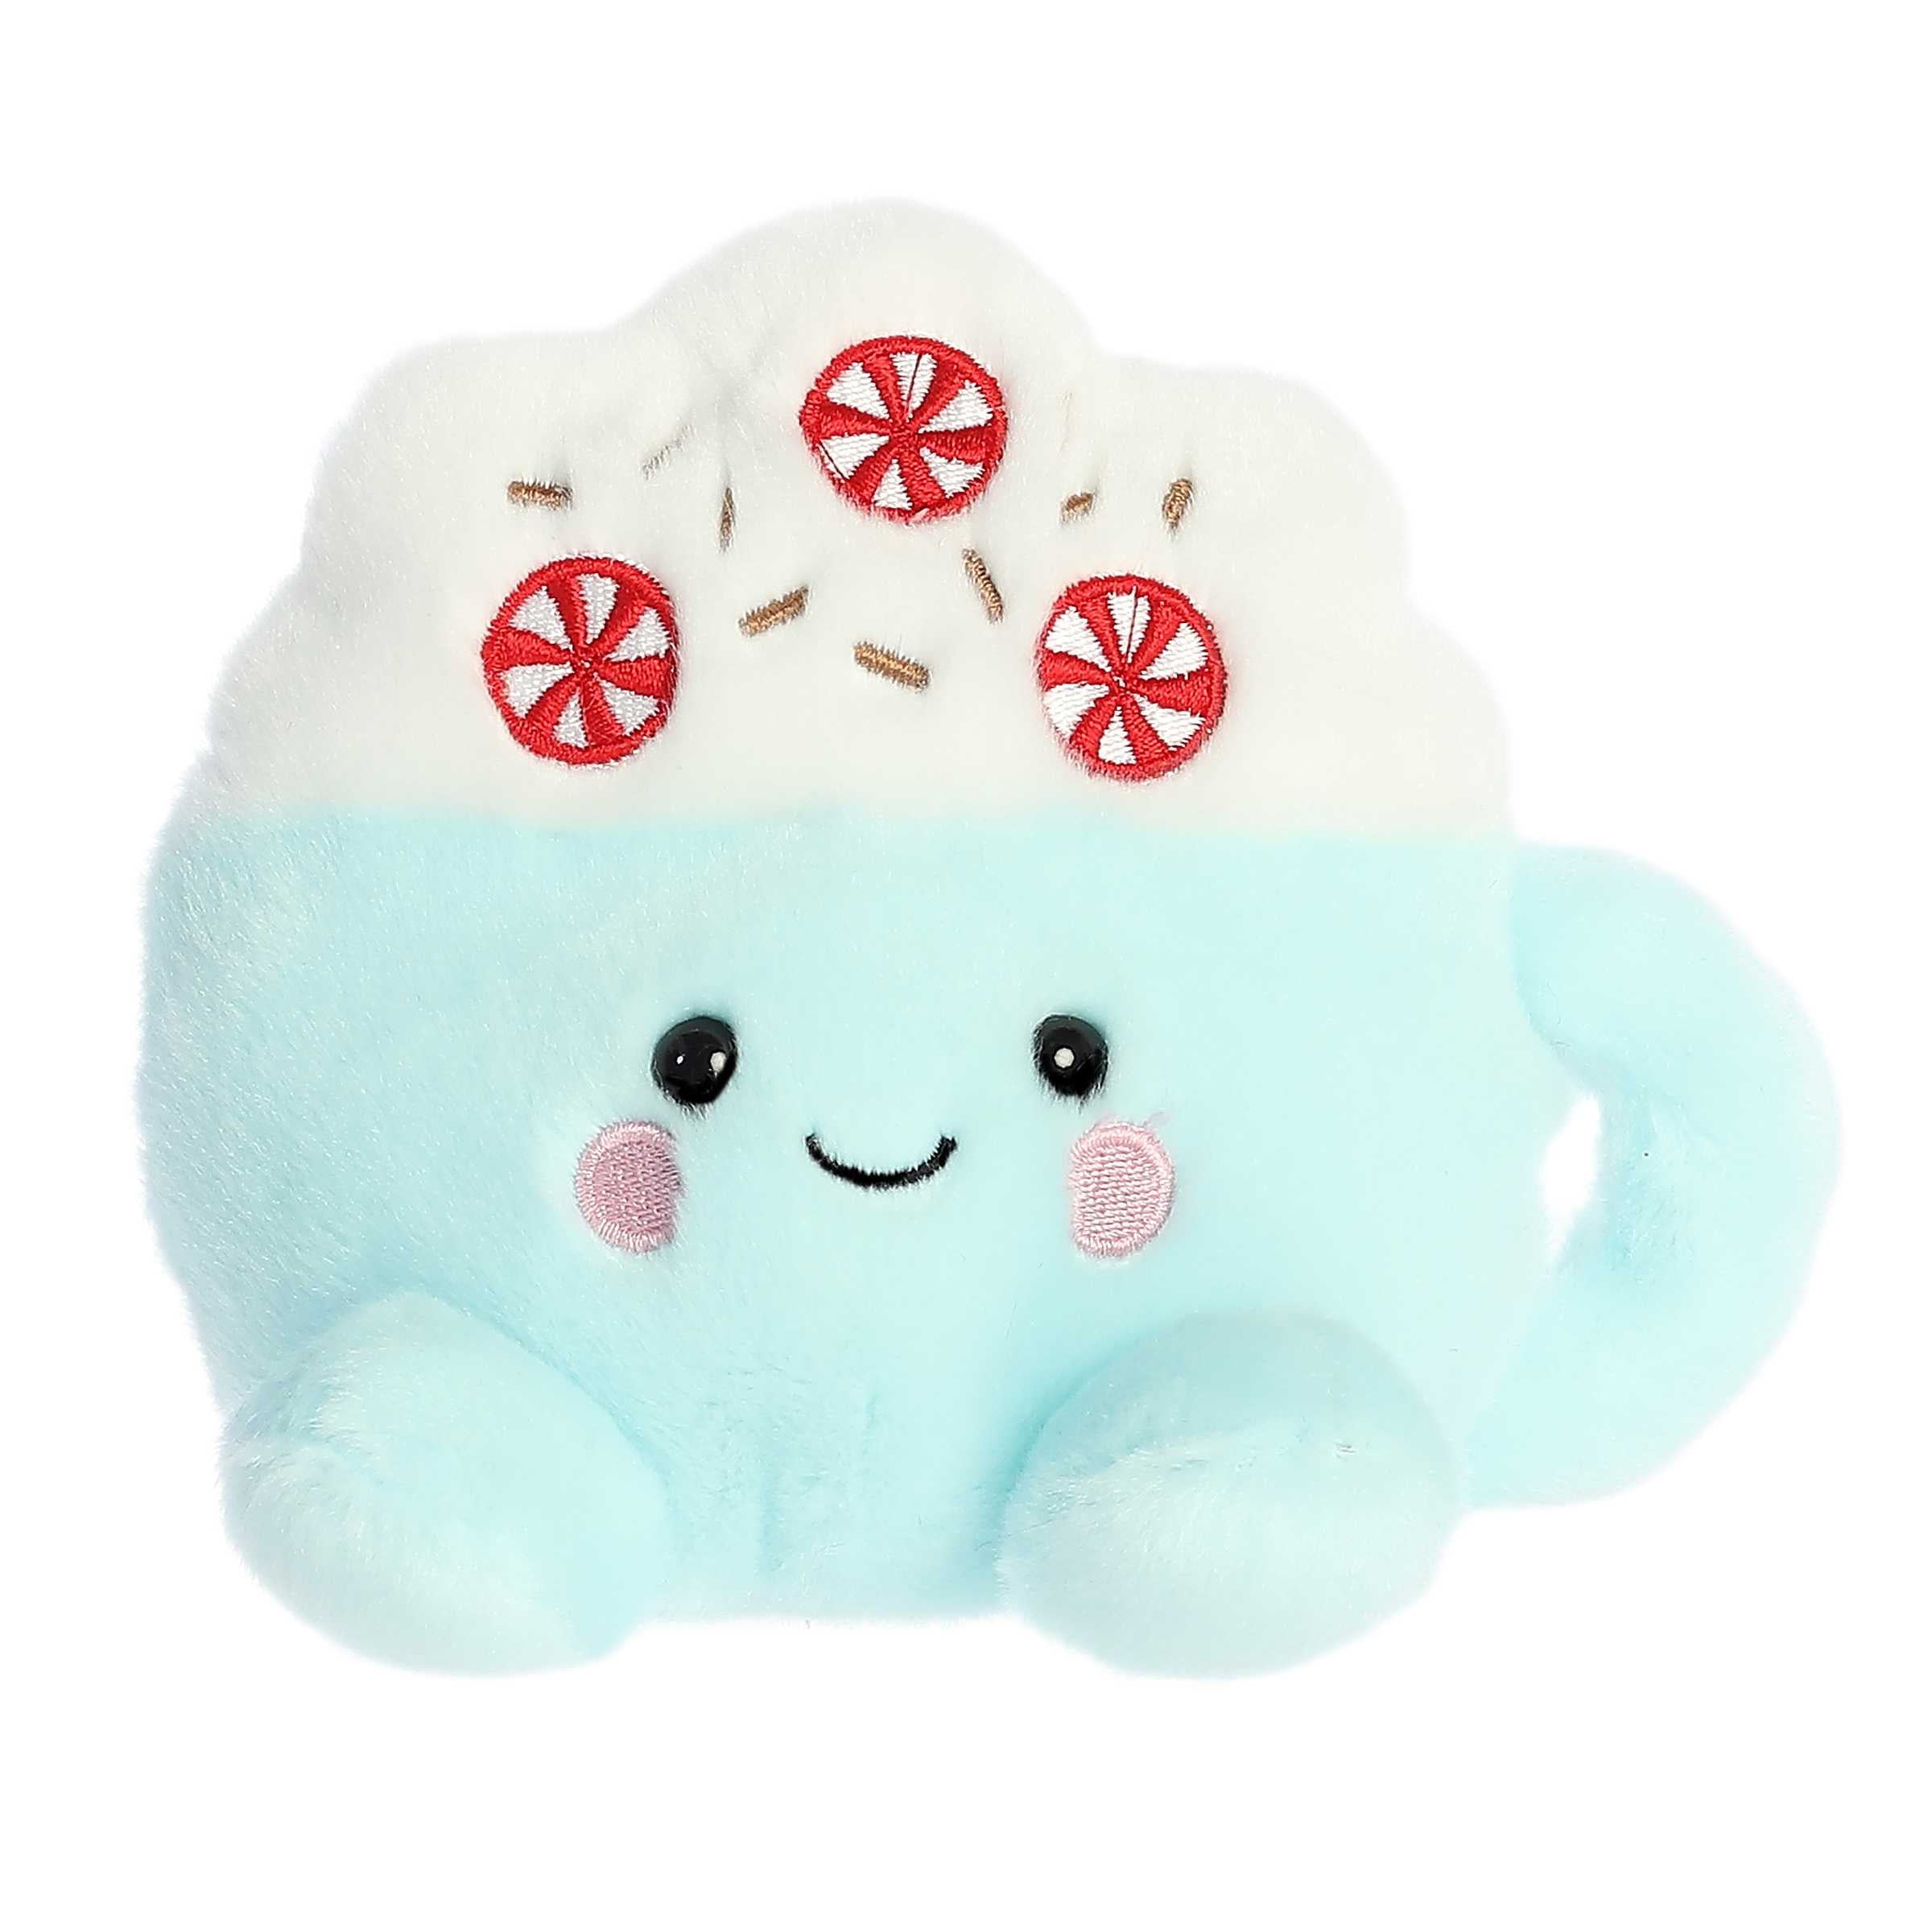 Adorable, happy peppermint latte plush toy in a blue mug topped with whipped cream and tiny embroidered peppermints